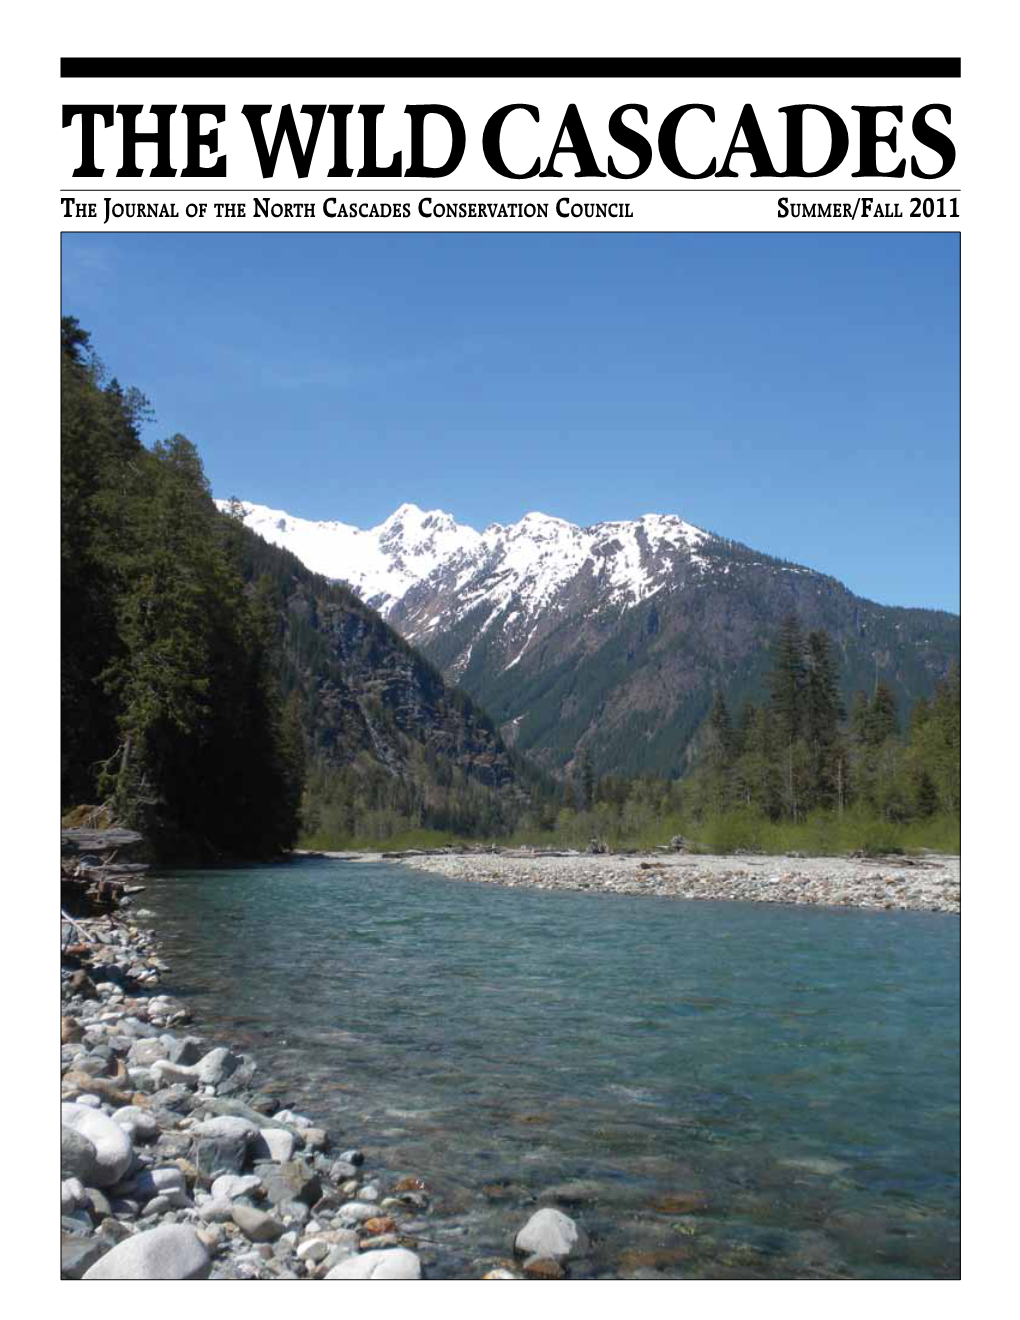 The Journal of the North Cascades Conservation Council Summer/Fall 2011